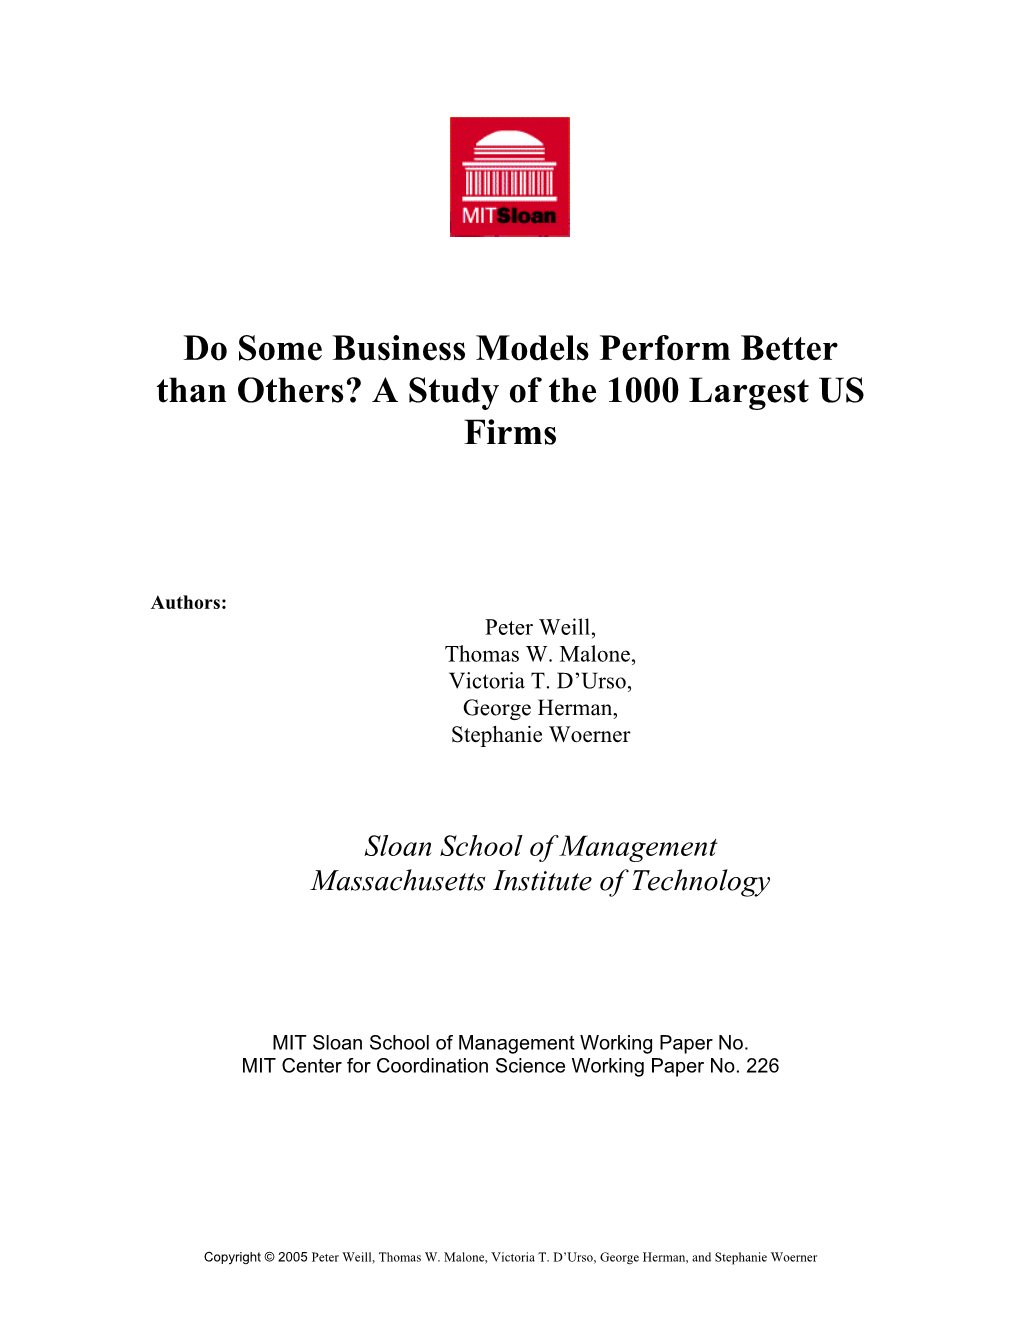 Do Some Business Models Perform Better Than Others? a Study of the 1000 Largest US Firms